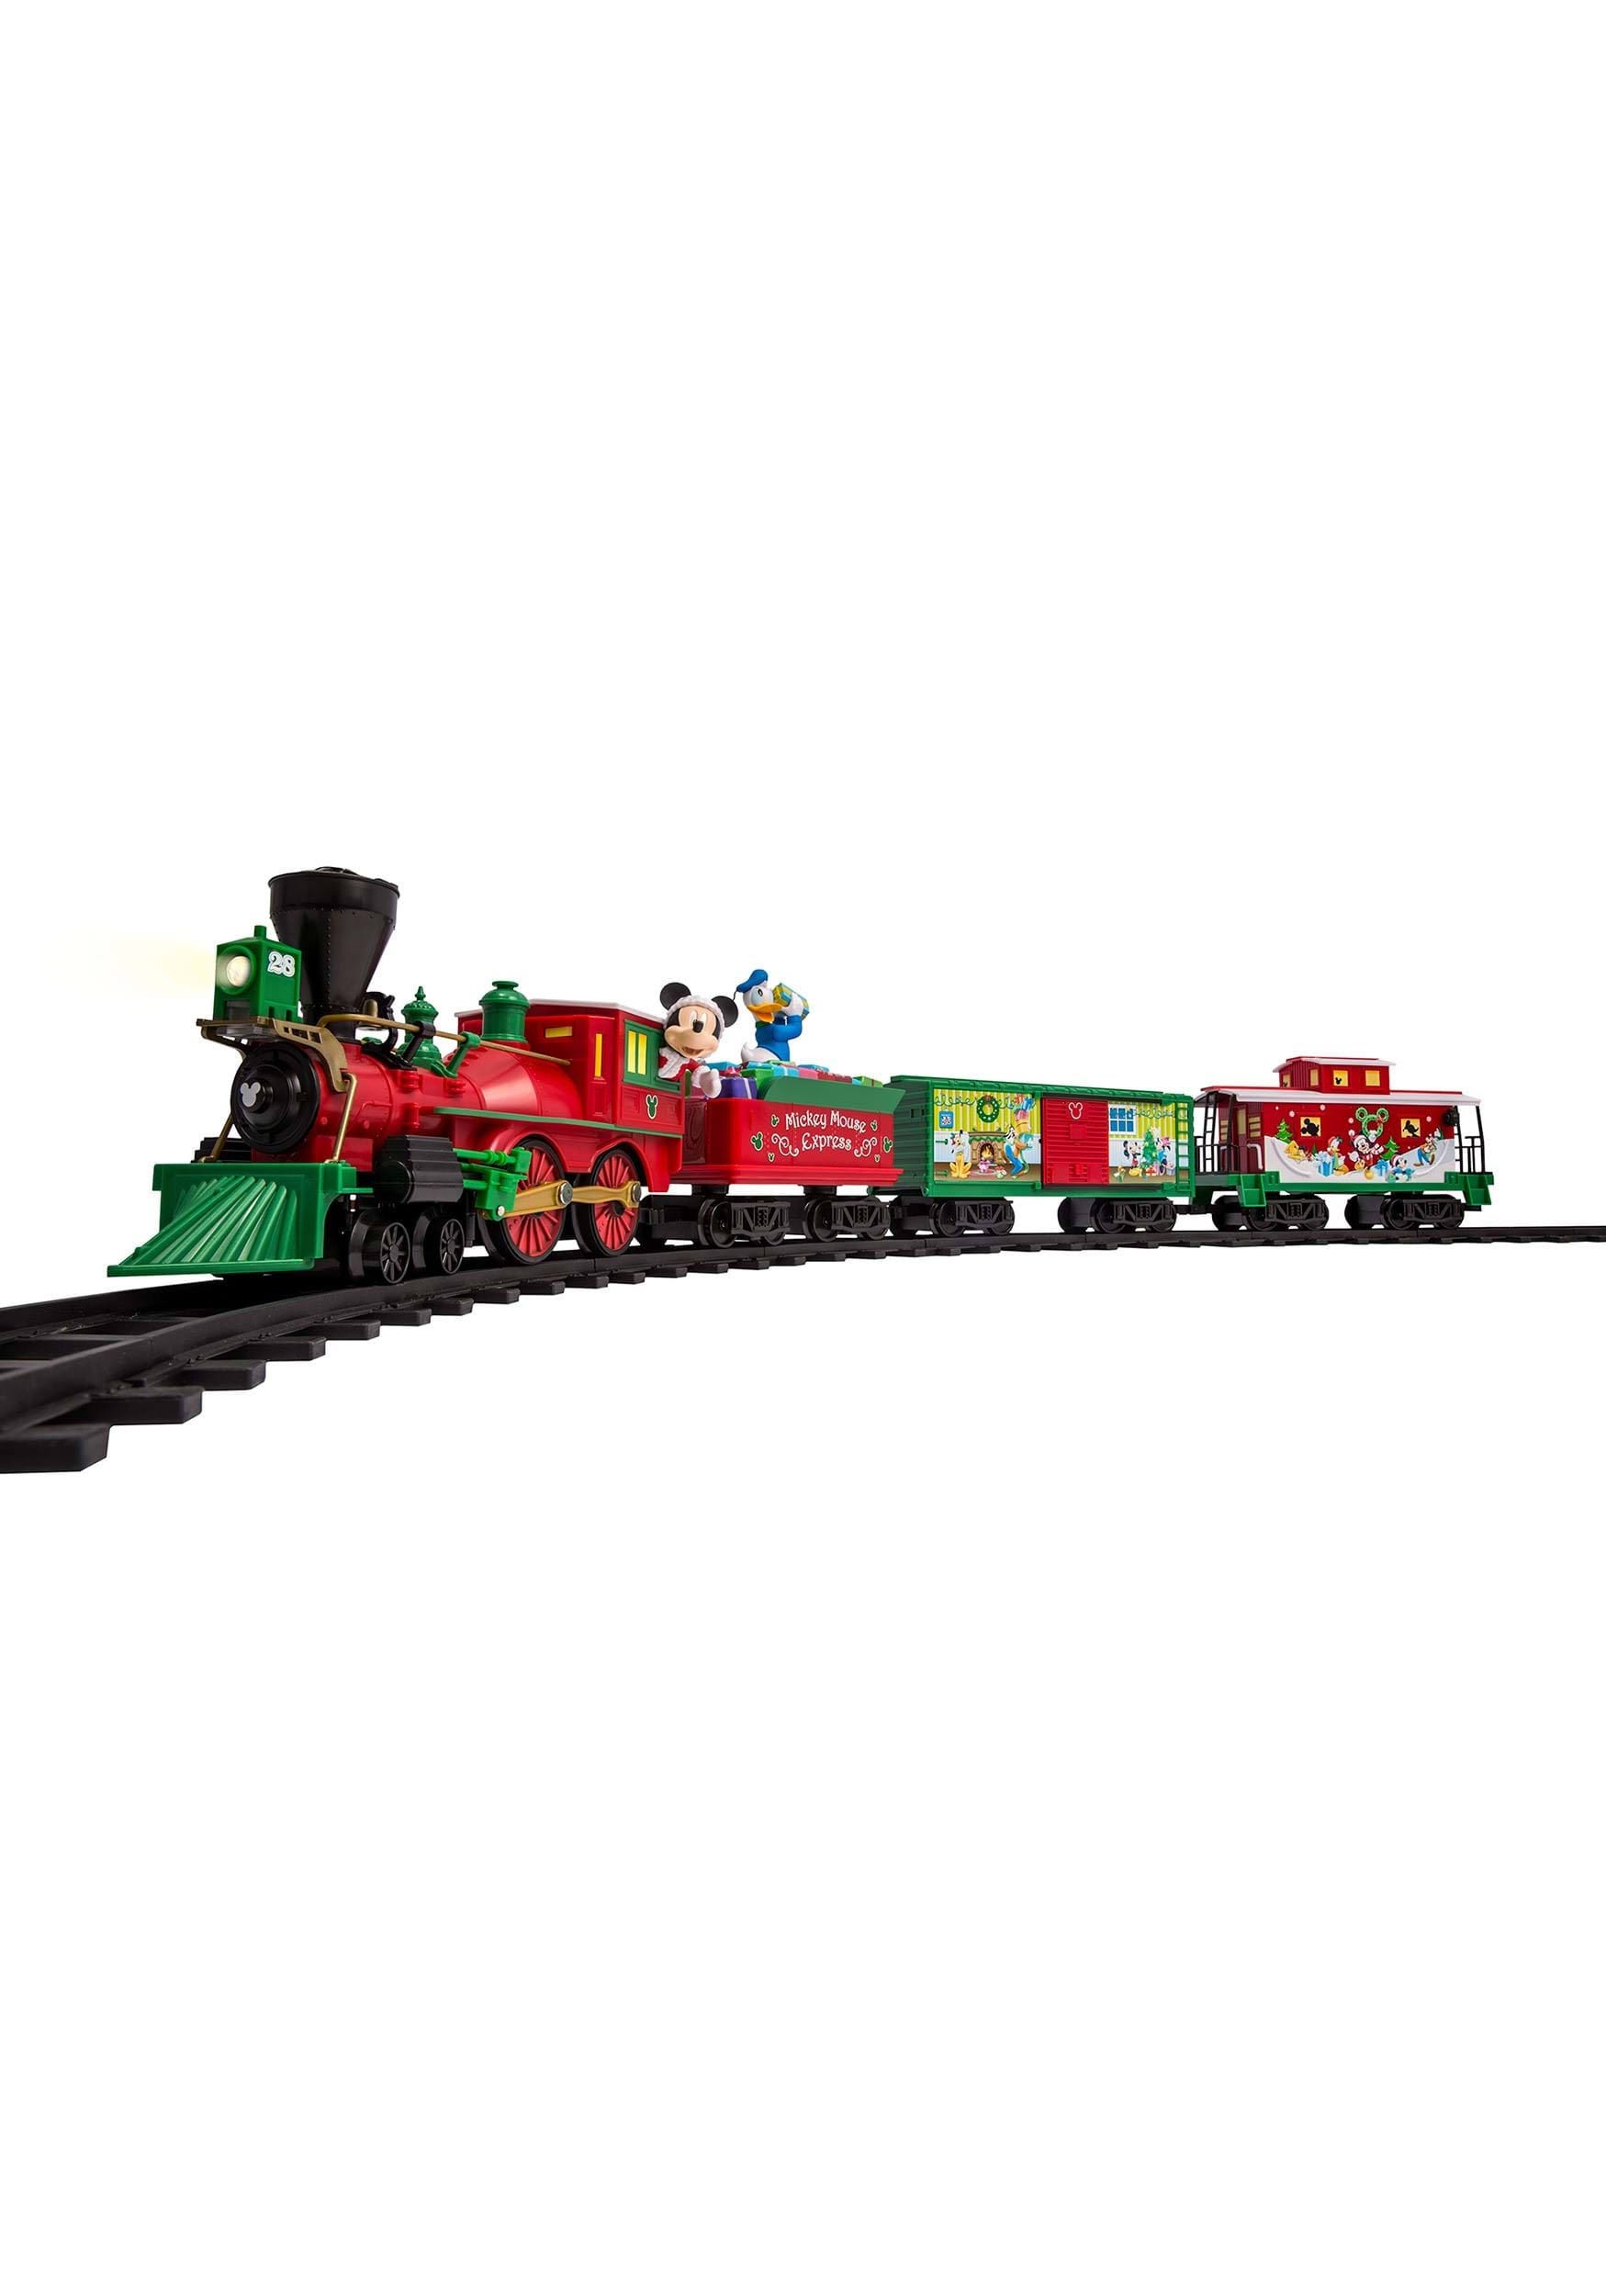 Mickey Mouse Express Disney Train Set for Christmas | Image